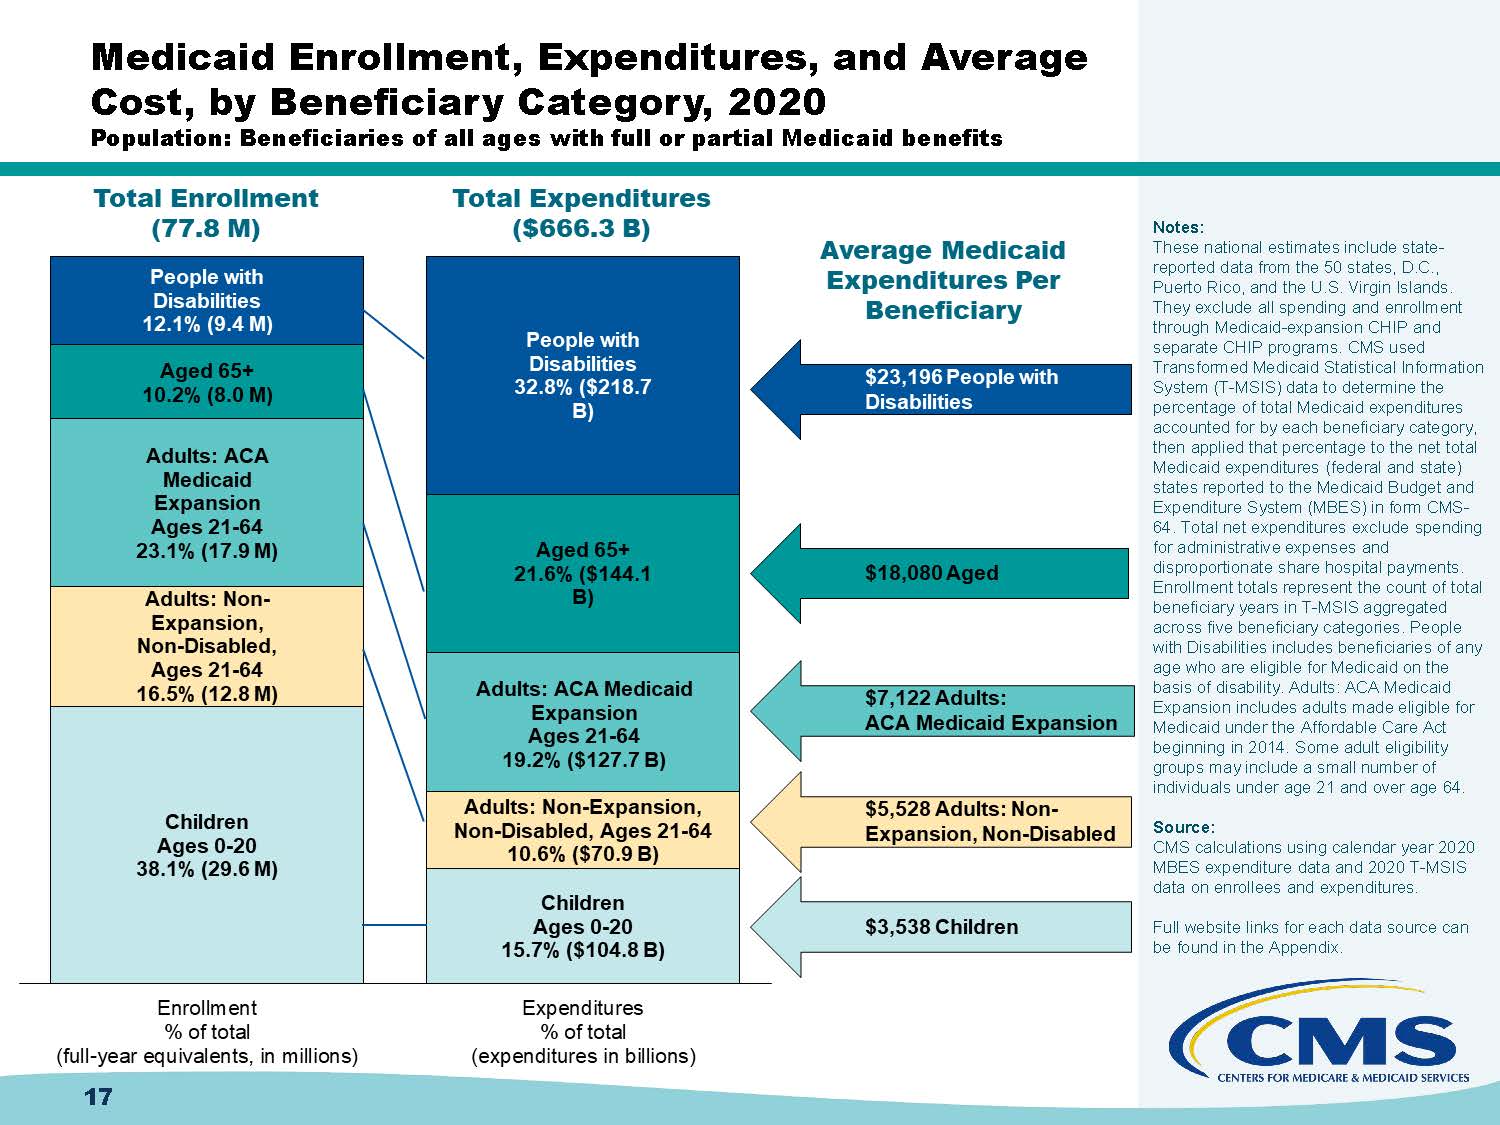 Medicaid enrollment, expenditures and average cost by beneficiary category from CMS.